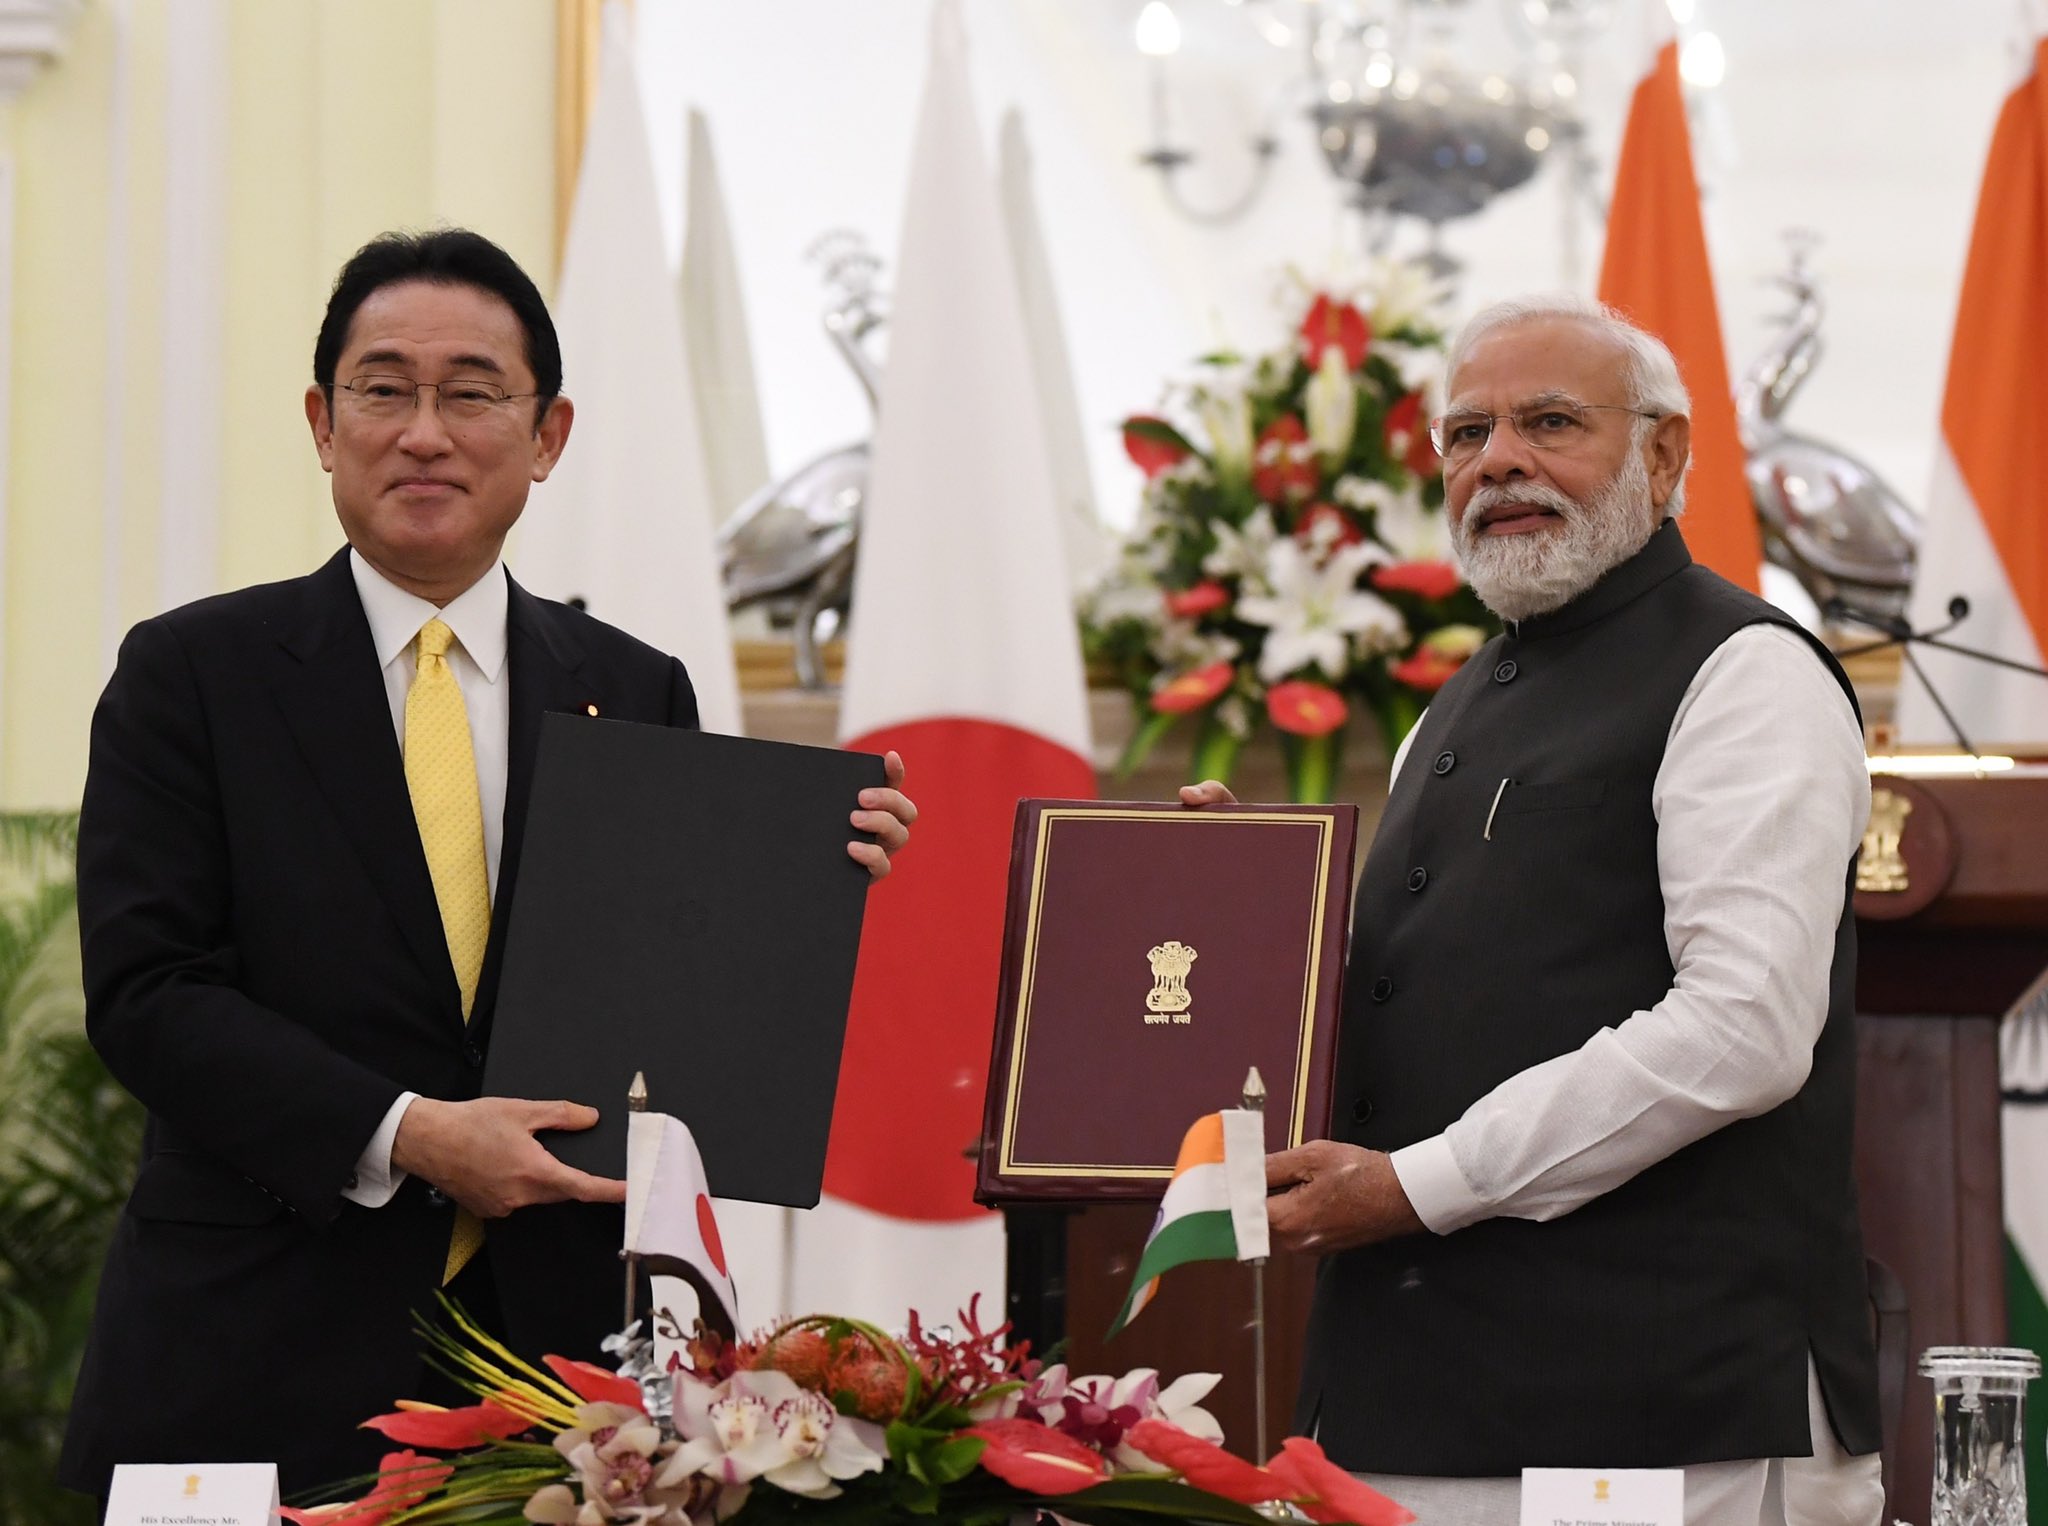 PM Kishida’s $42bn Investment Opens New Chapter In Indo-Japan Ties